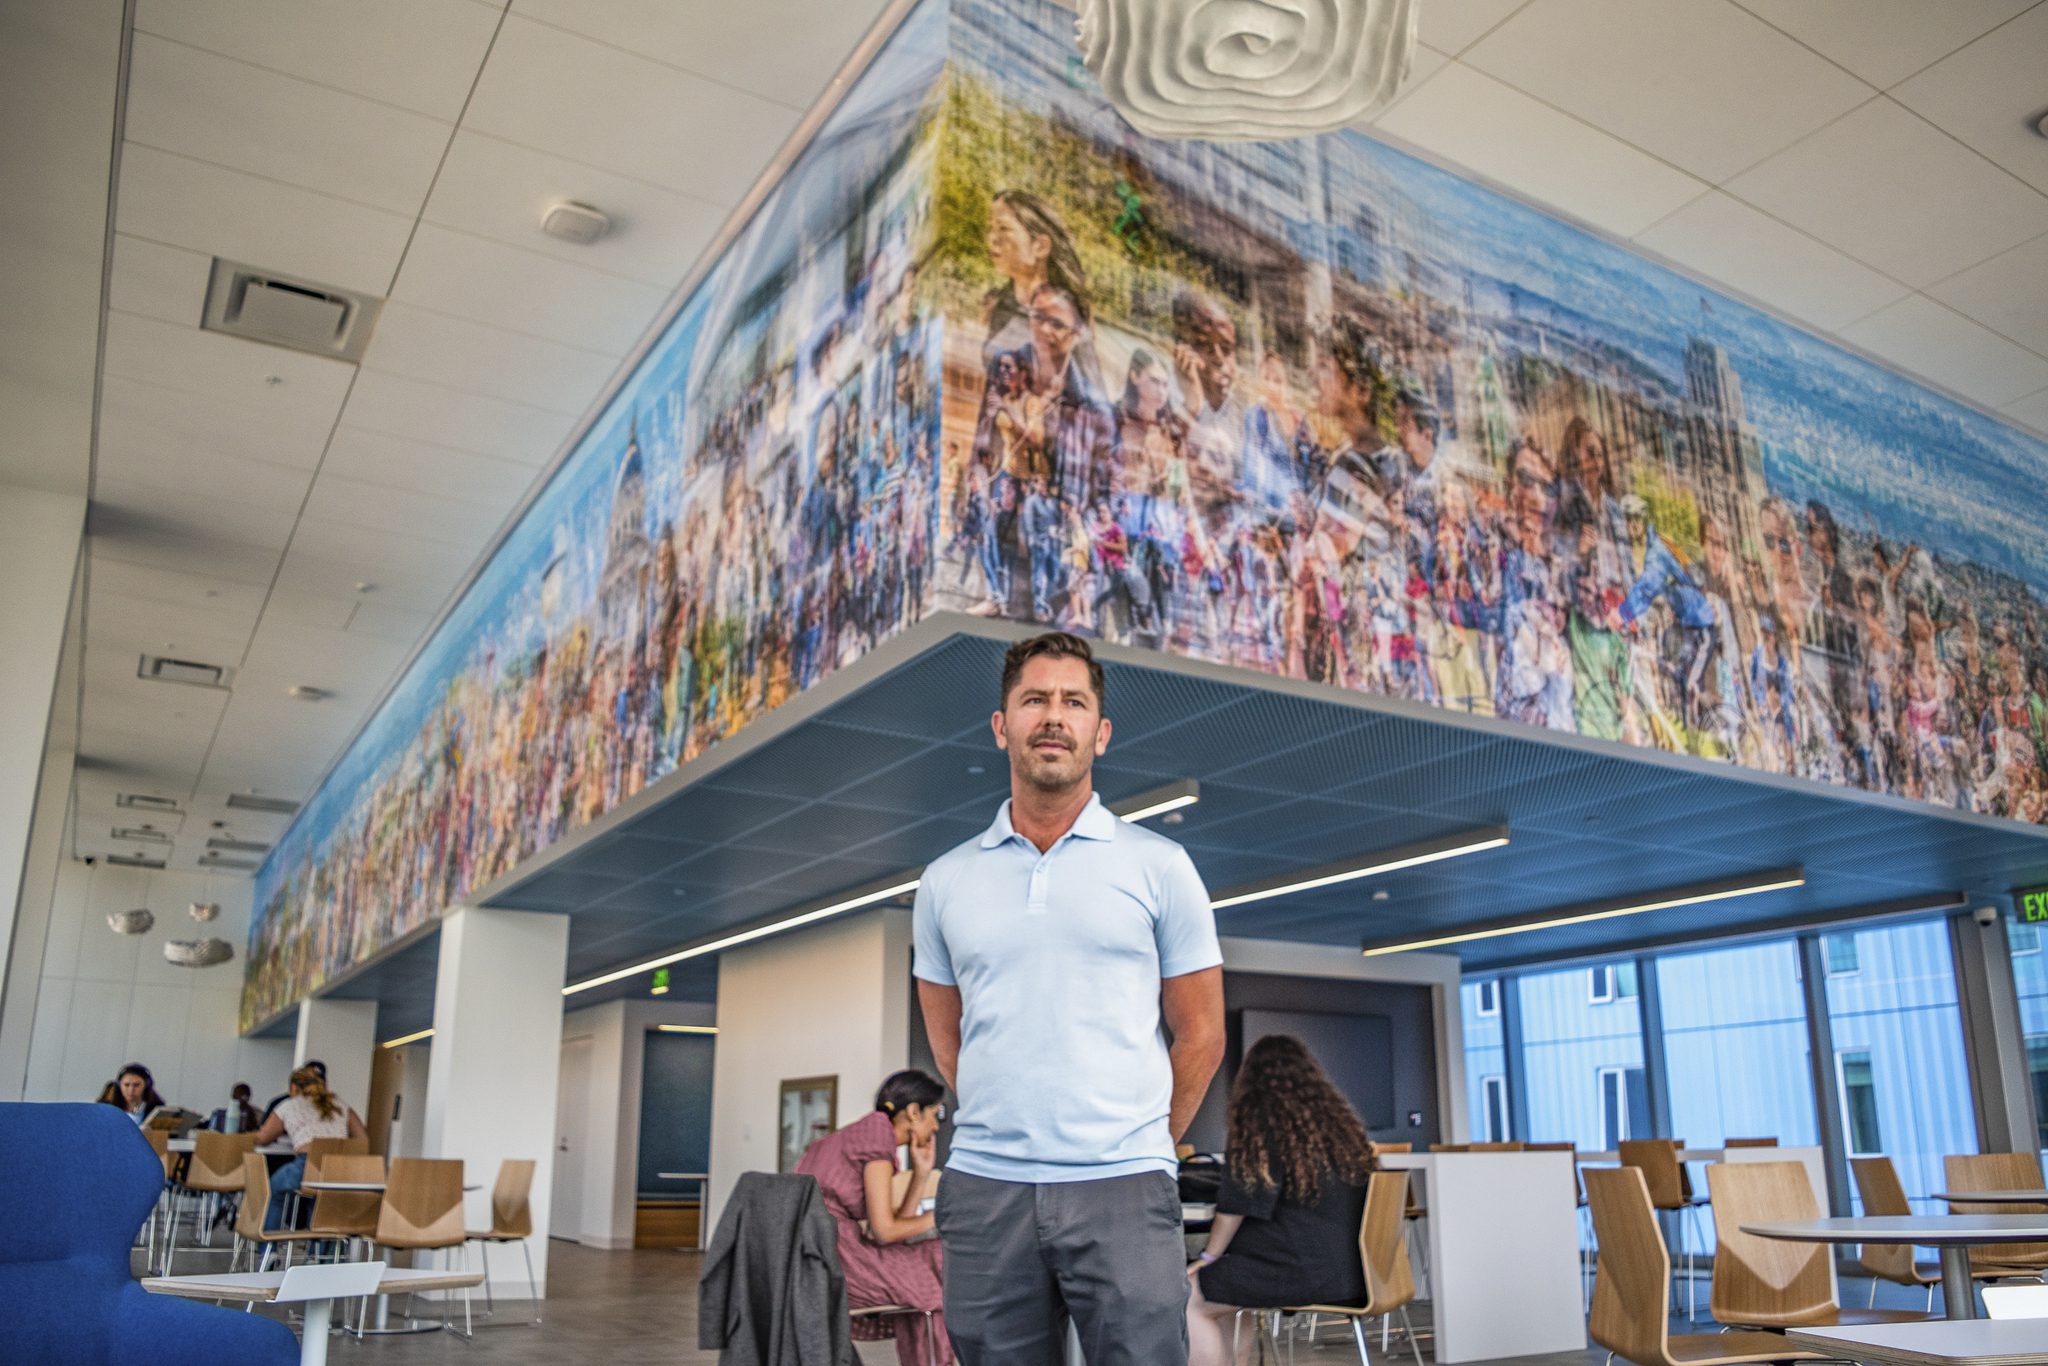 Artist and photographer Christopher Dydyk stands in front of his large mural on UC Law SF campus wearing a blue polo shirt and jeans.